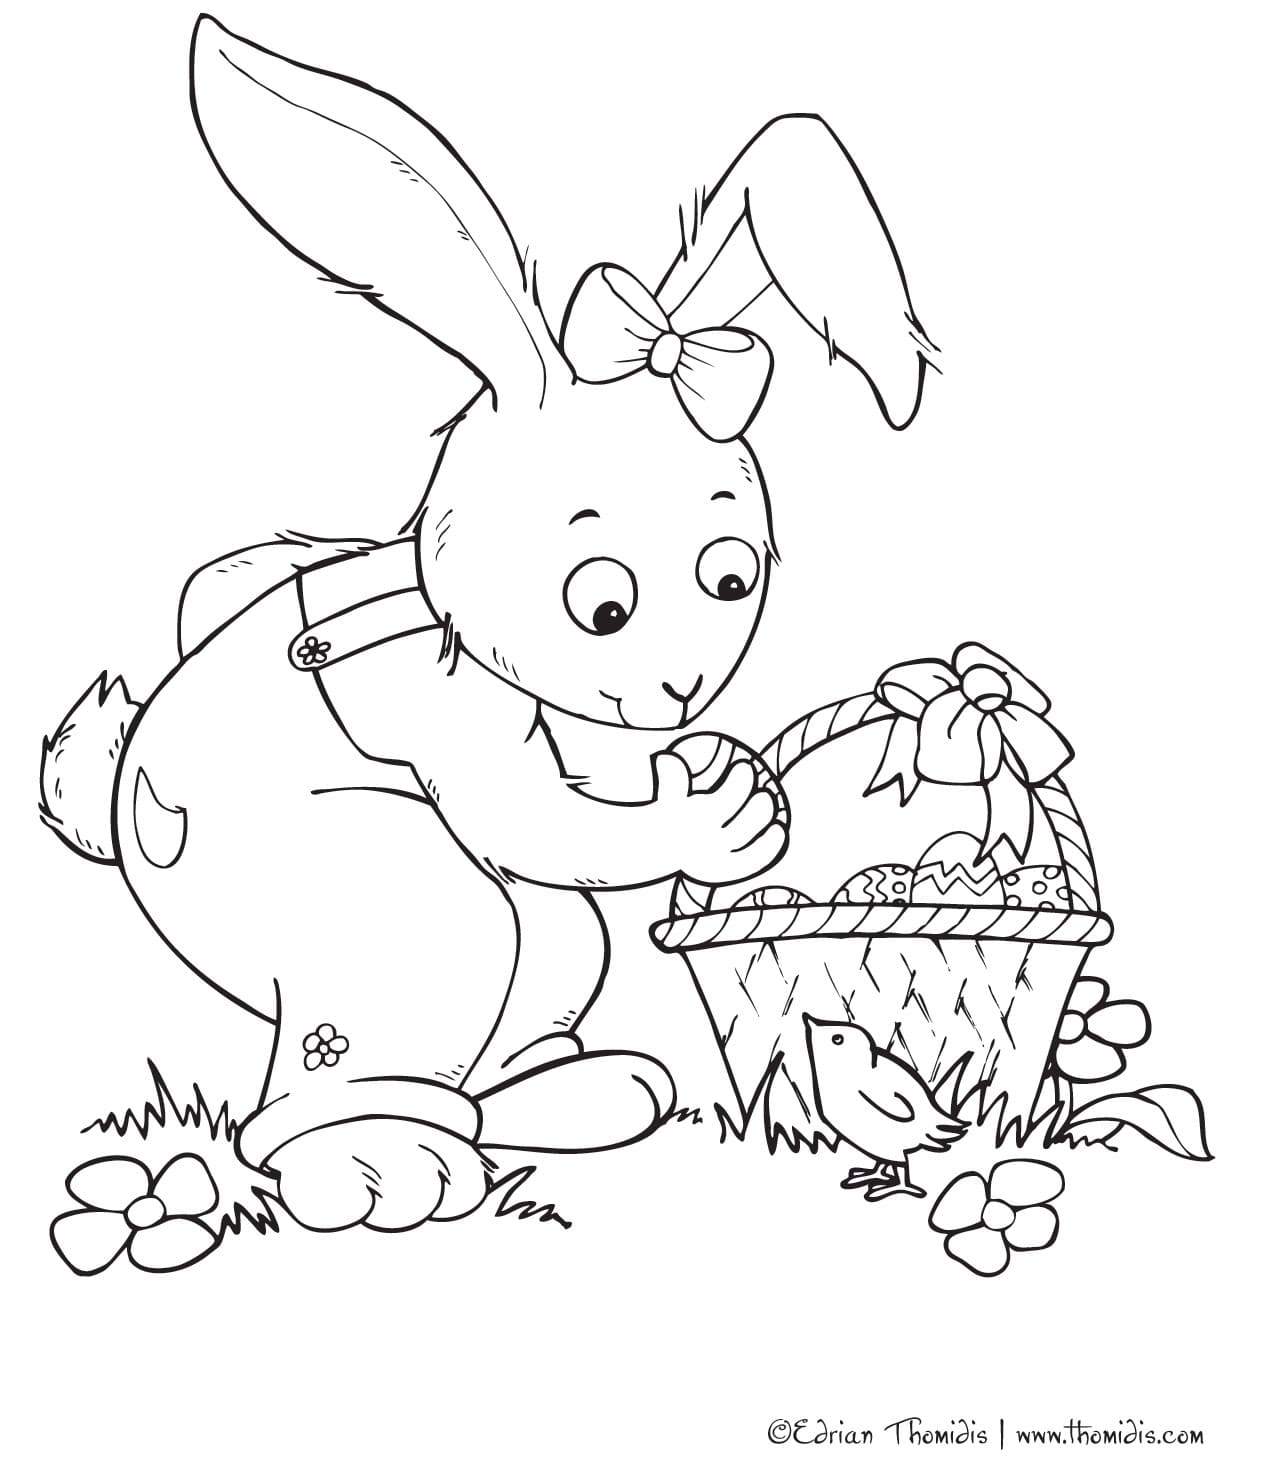 Cute Easter Bunny Image For Children Coloring Page